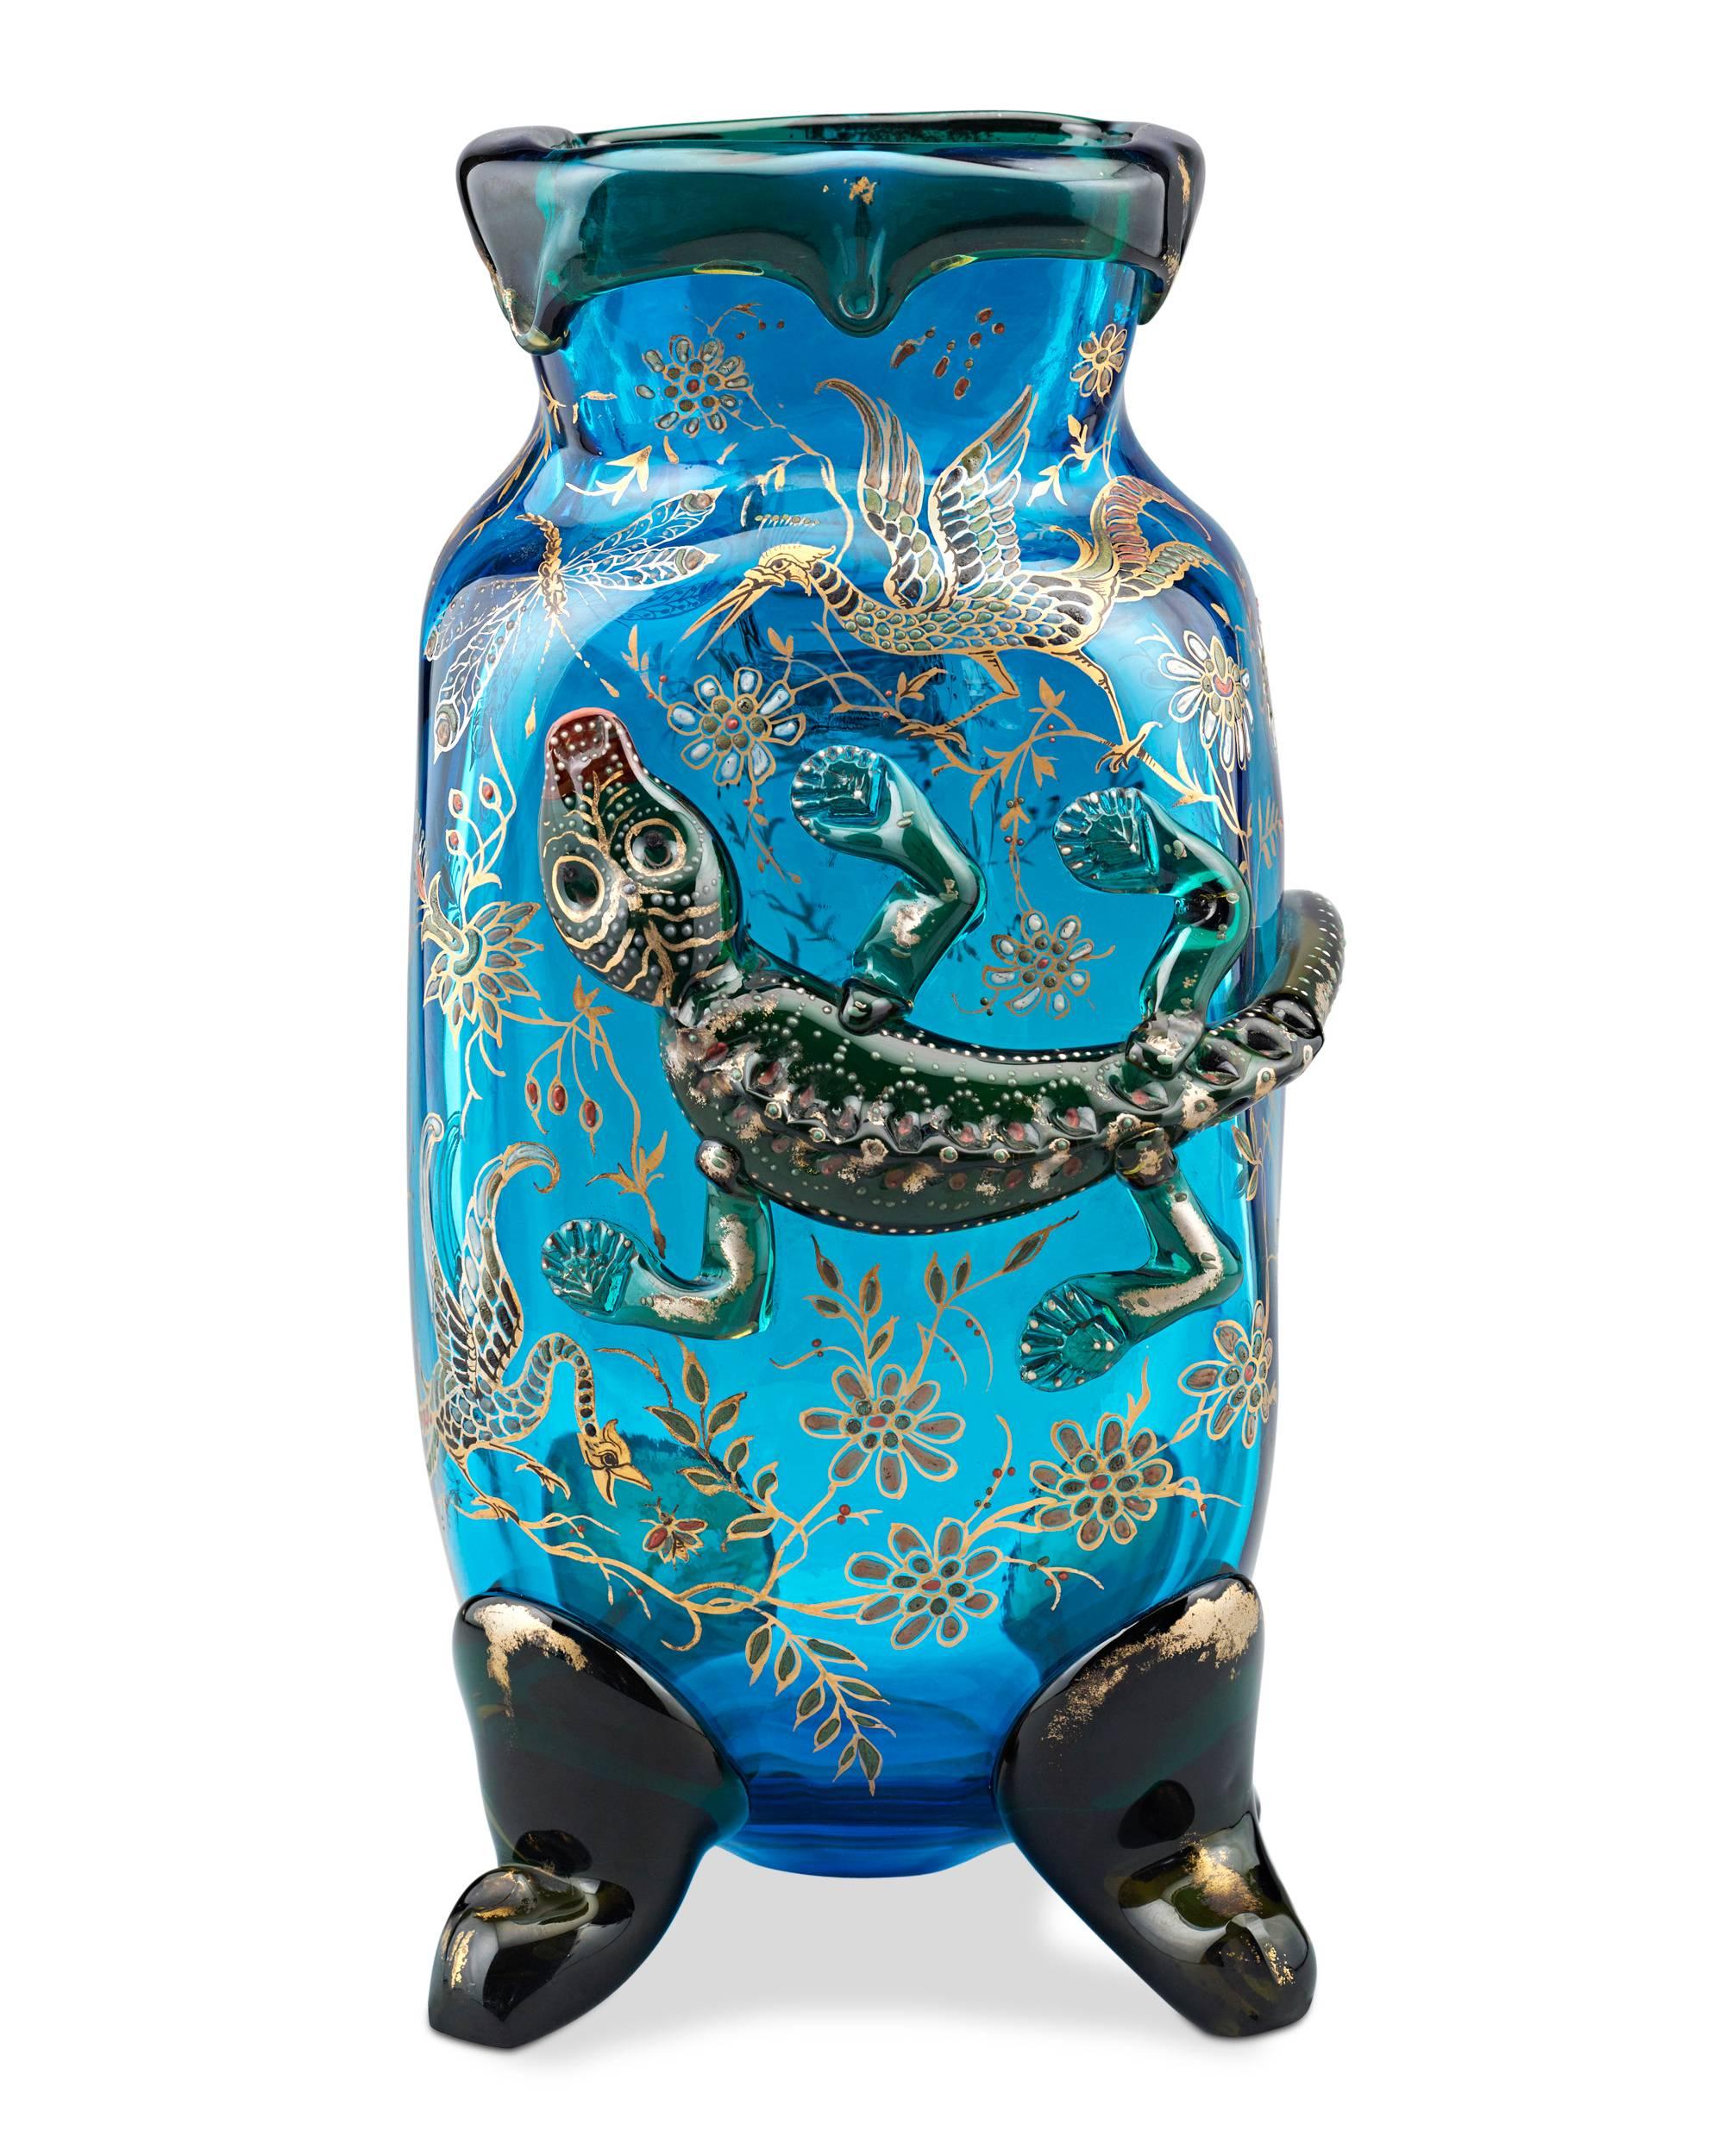 Displaying grand size and innovative artistry is this original pair of Japonesque salamander vases attributed to Parisian glass artist Auguste Jean. Rarities in Jean's oeuvre, these fascinating vases measure over a foot in height and are perfect